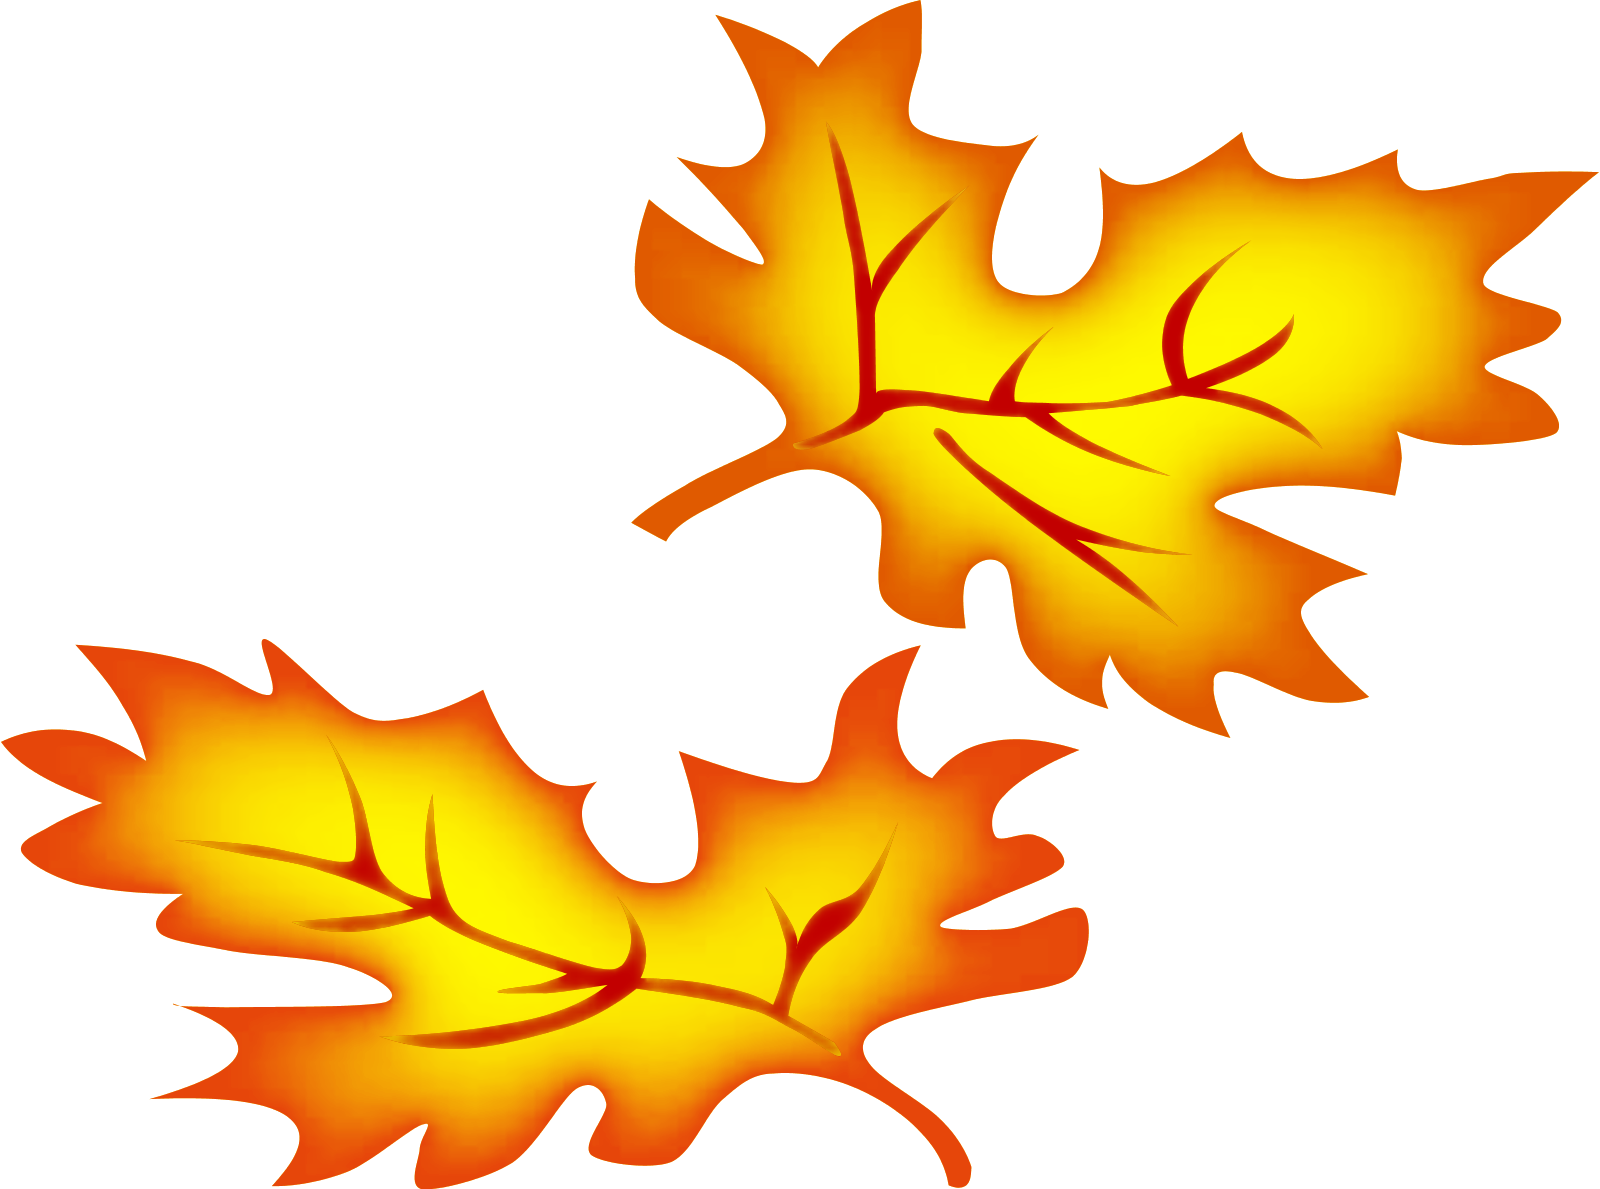 Fall leaves border clipart free clipart images 5